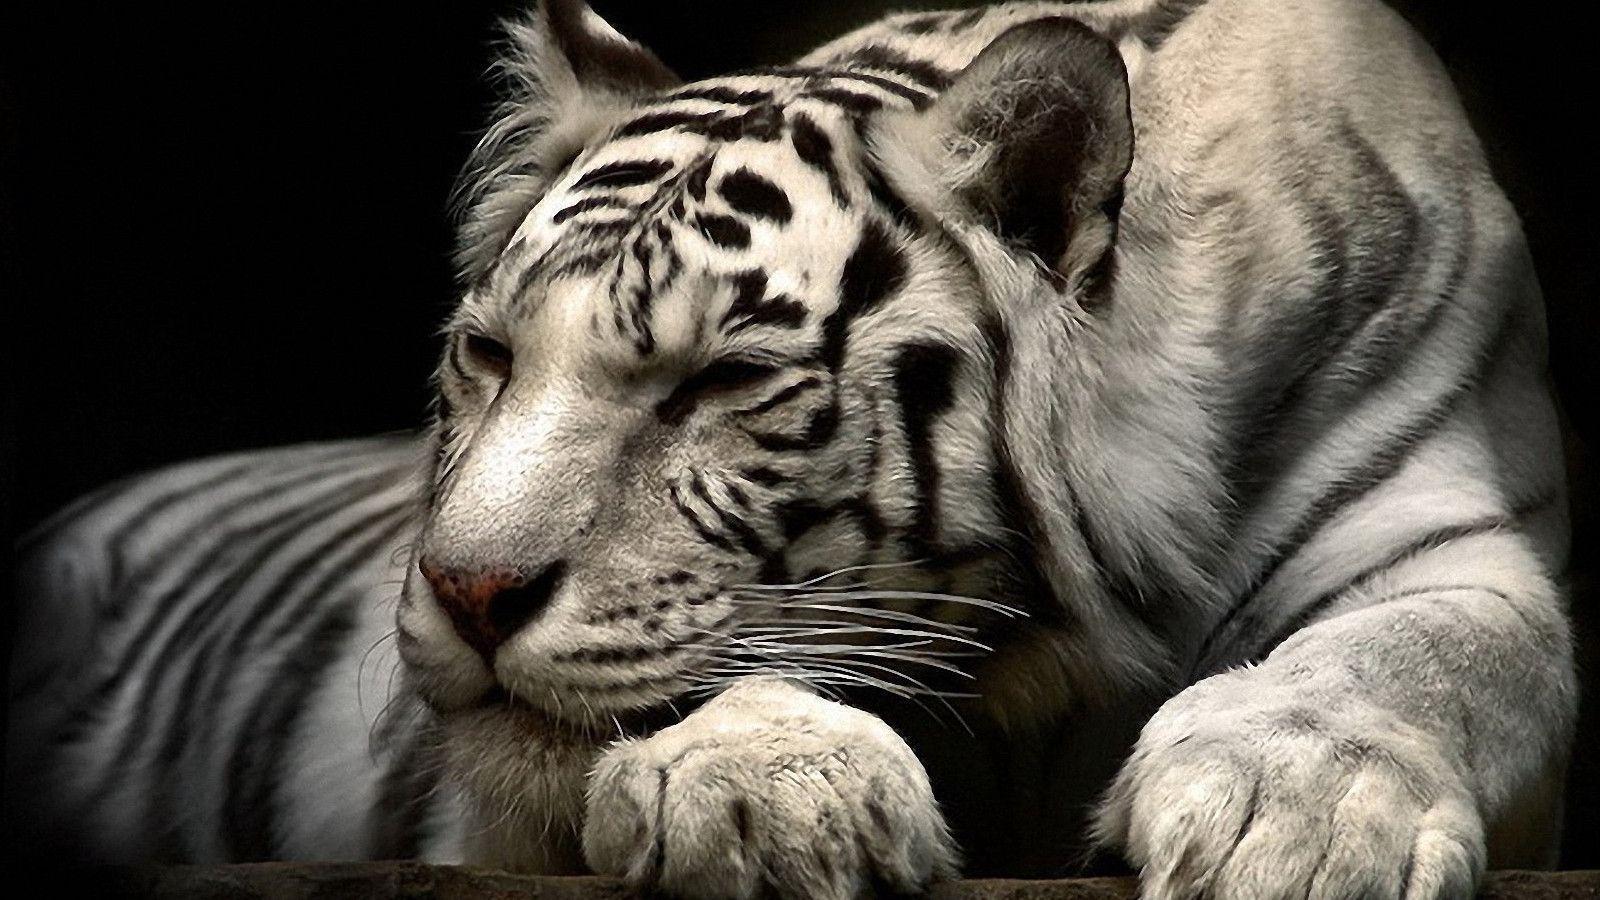 Tiger Wallpapers Hd: Siberian White Tiger Hd Wallpapers